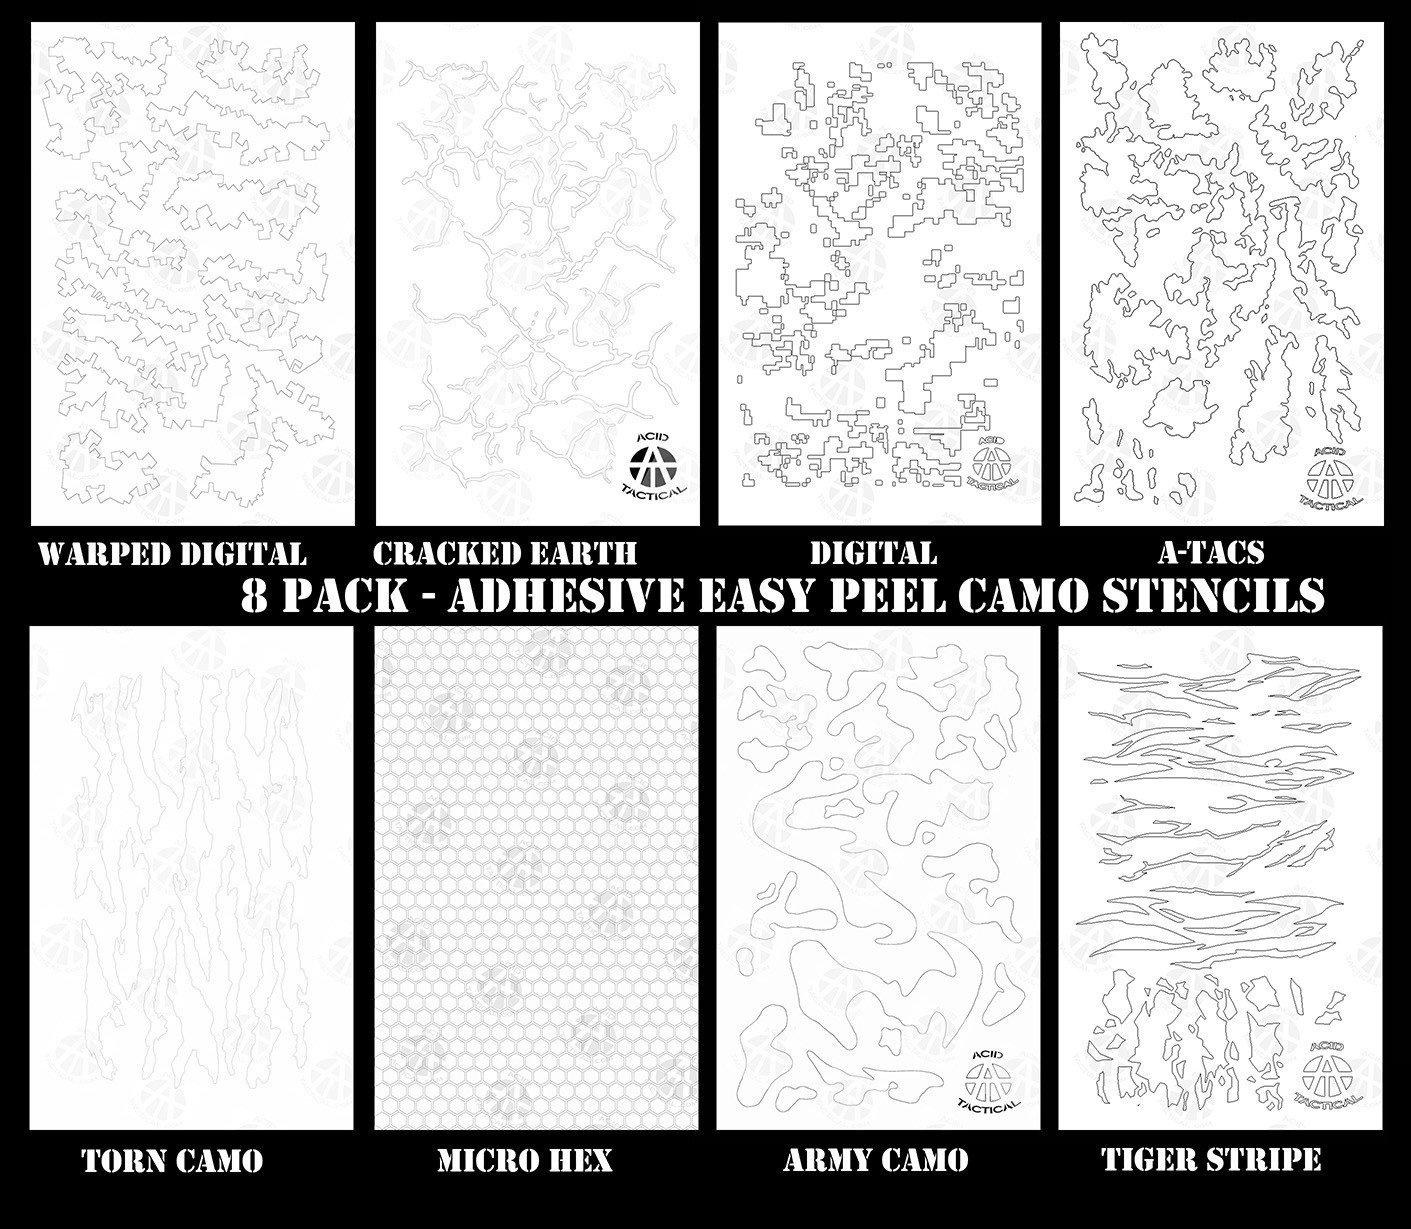  Acid Tactical® 2 Pack Adhesive Sticker Camouflage